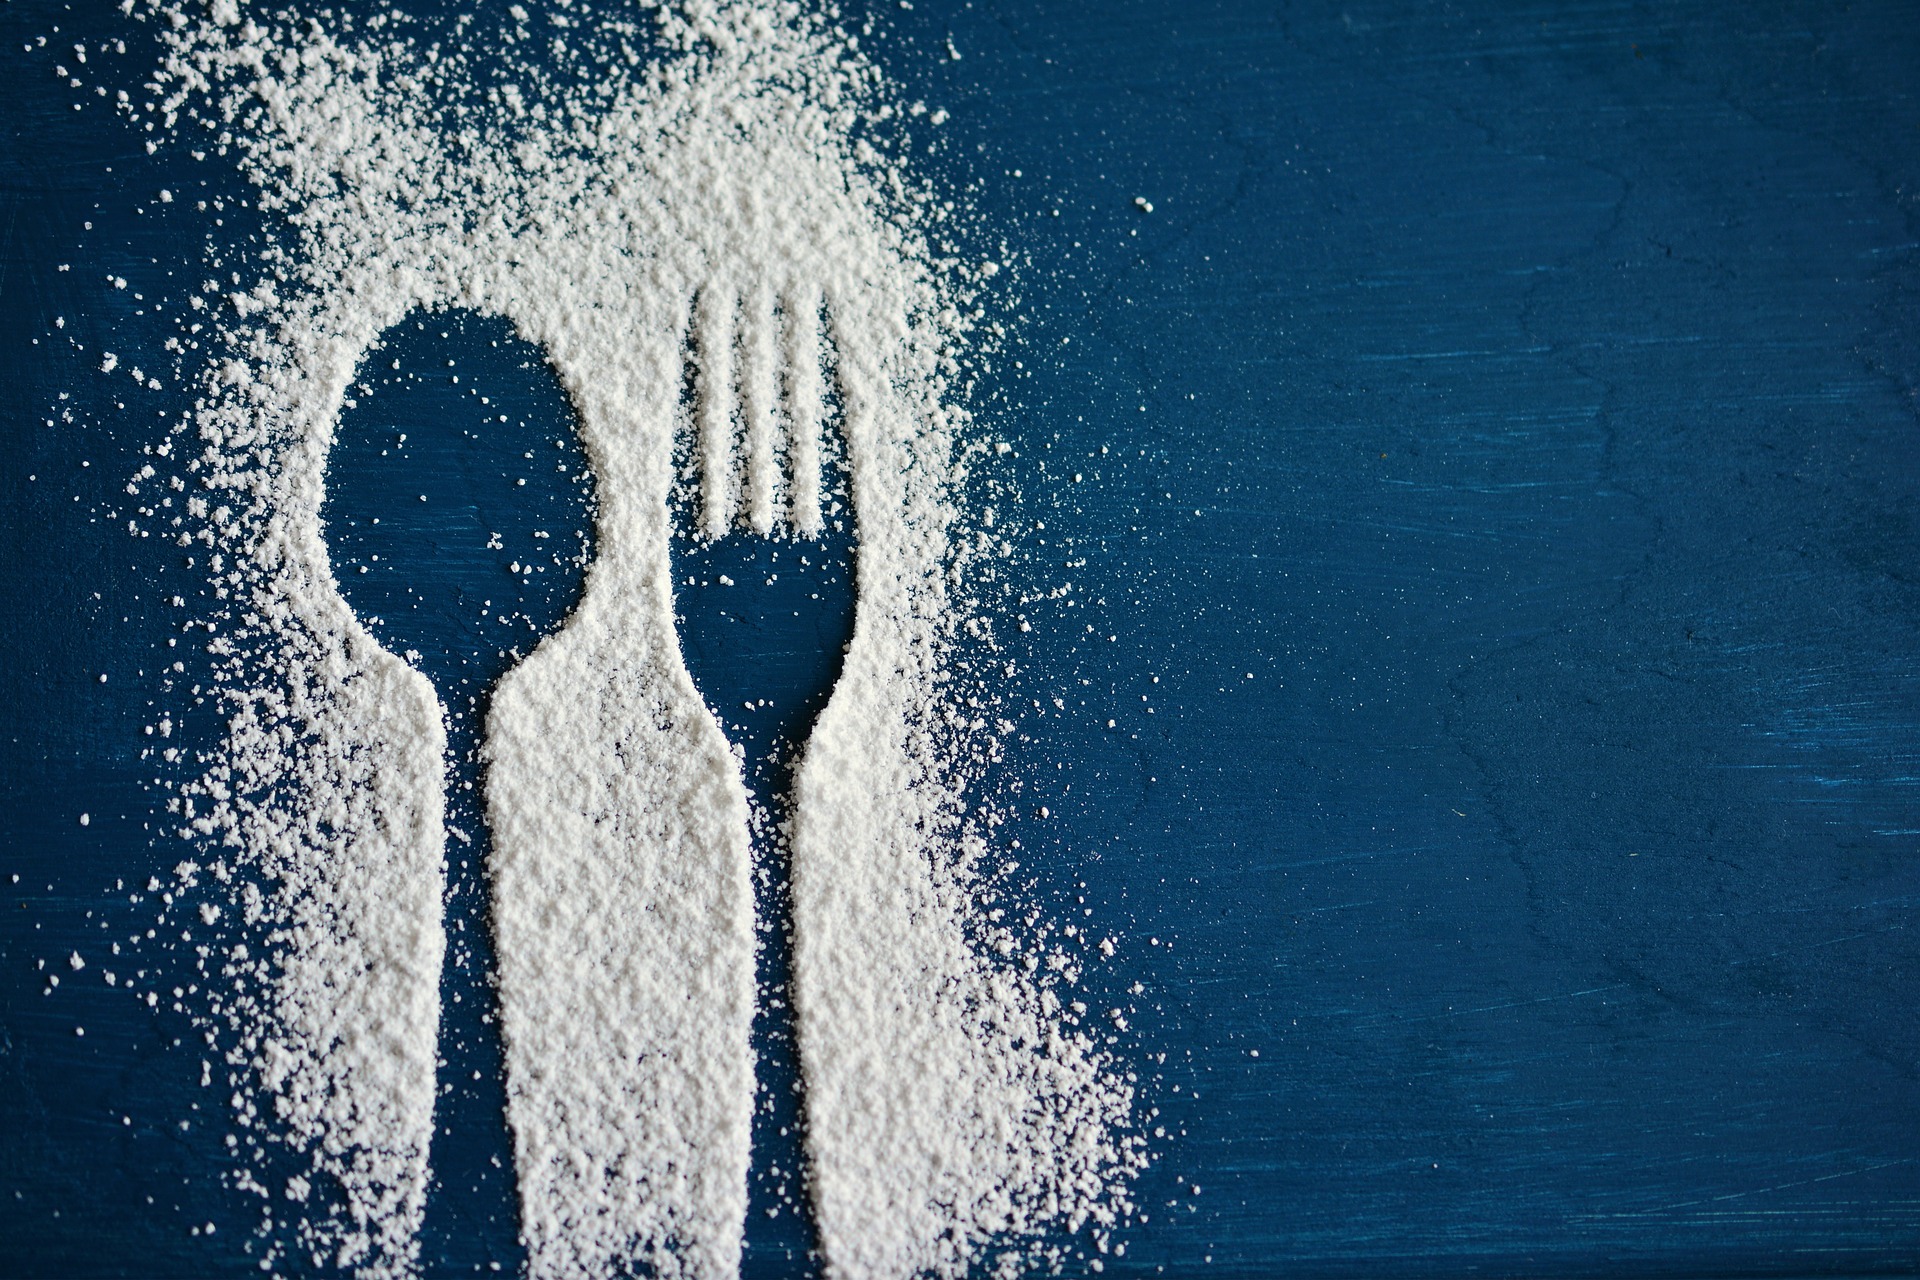 Avoid sugar because too much sugar could be making you sick